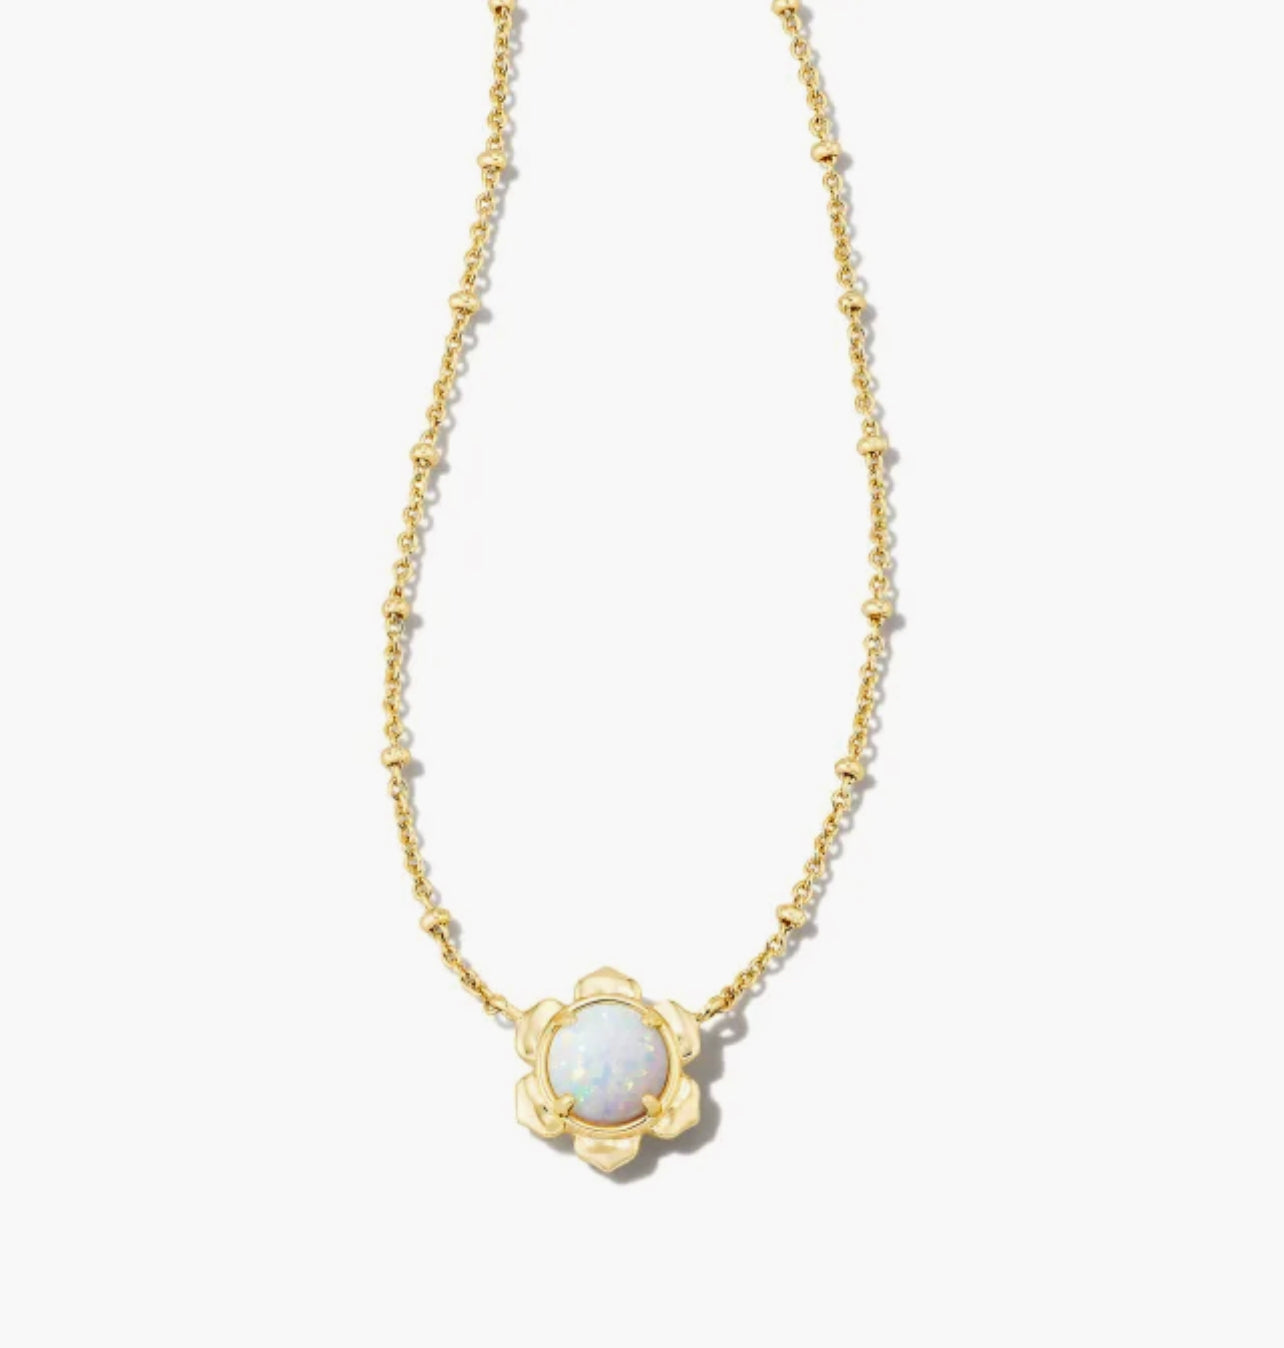 Kendra Scott-Susie Gold Short Pendant Necklace in Bright White Kyocera 9608853094